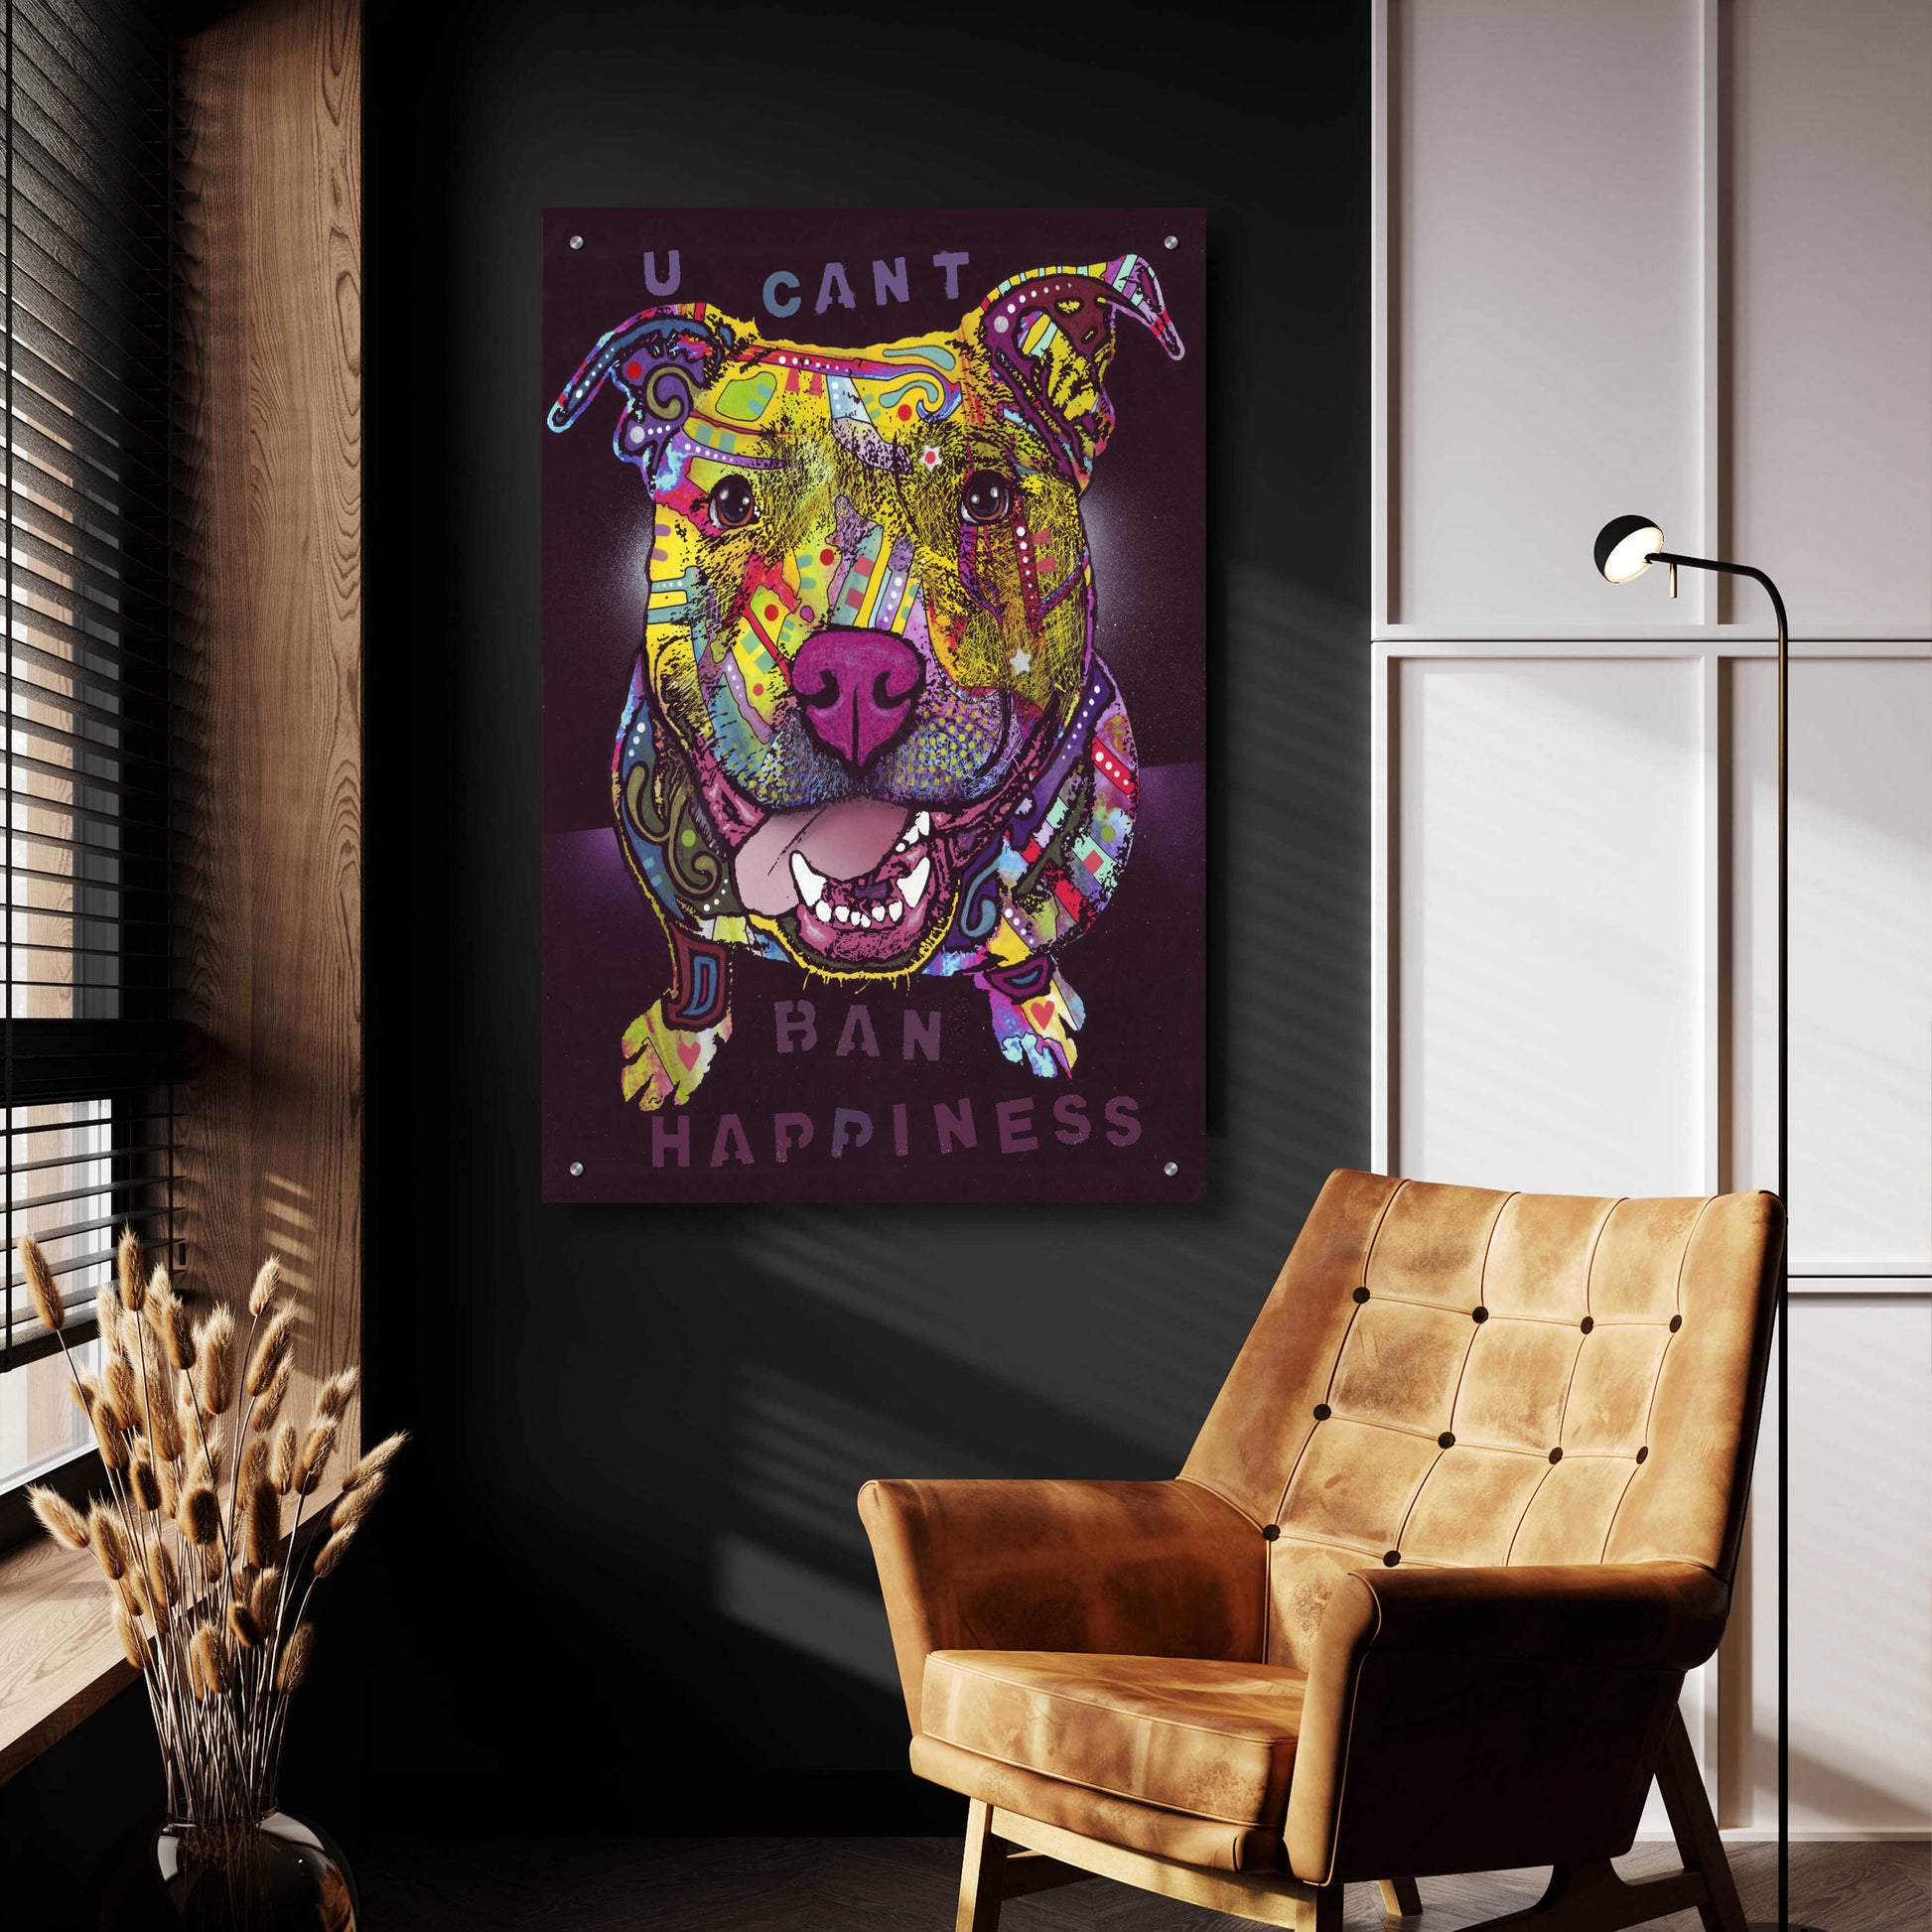 Epic Art 'U Cant Ban Happiness' by Dean Russo, Acrylic Glass Wall Art,24x36